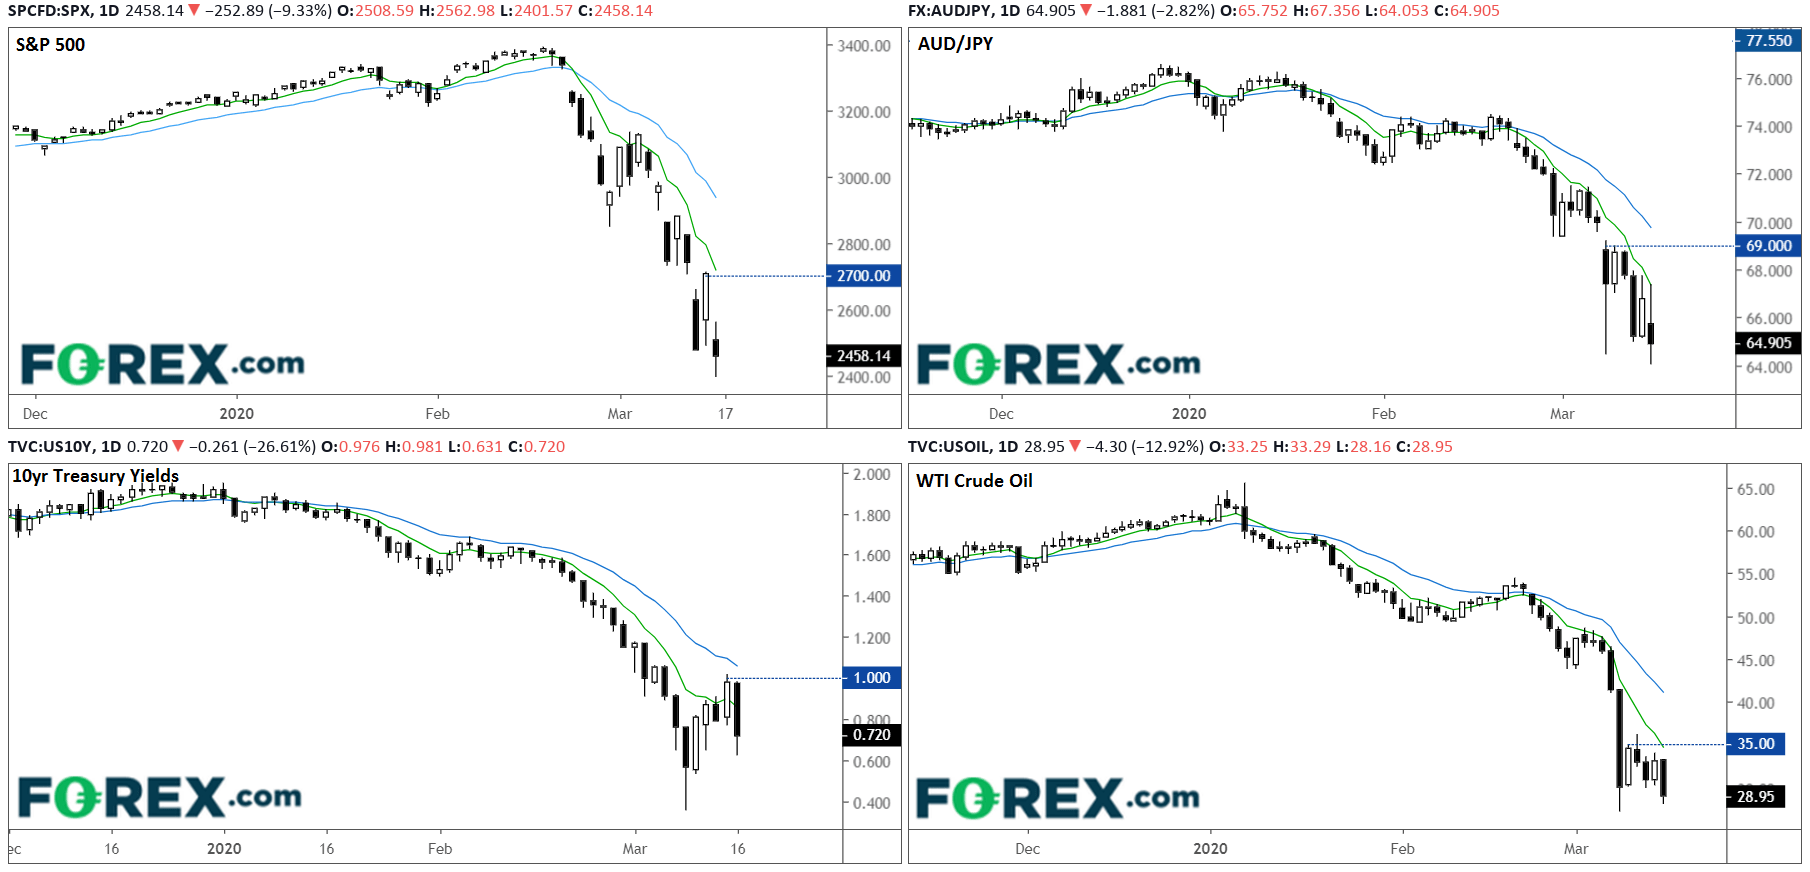 Market charts March 2020